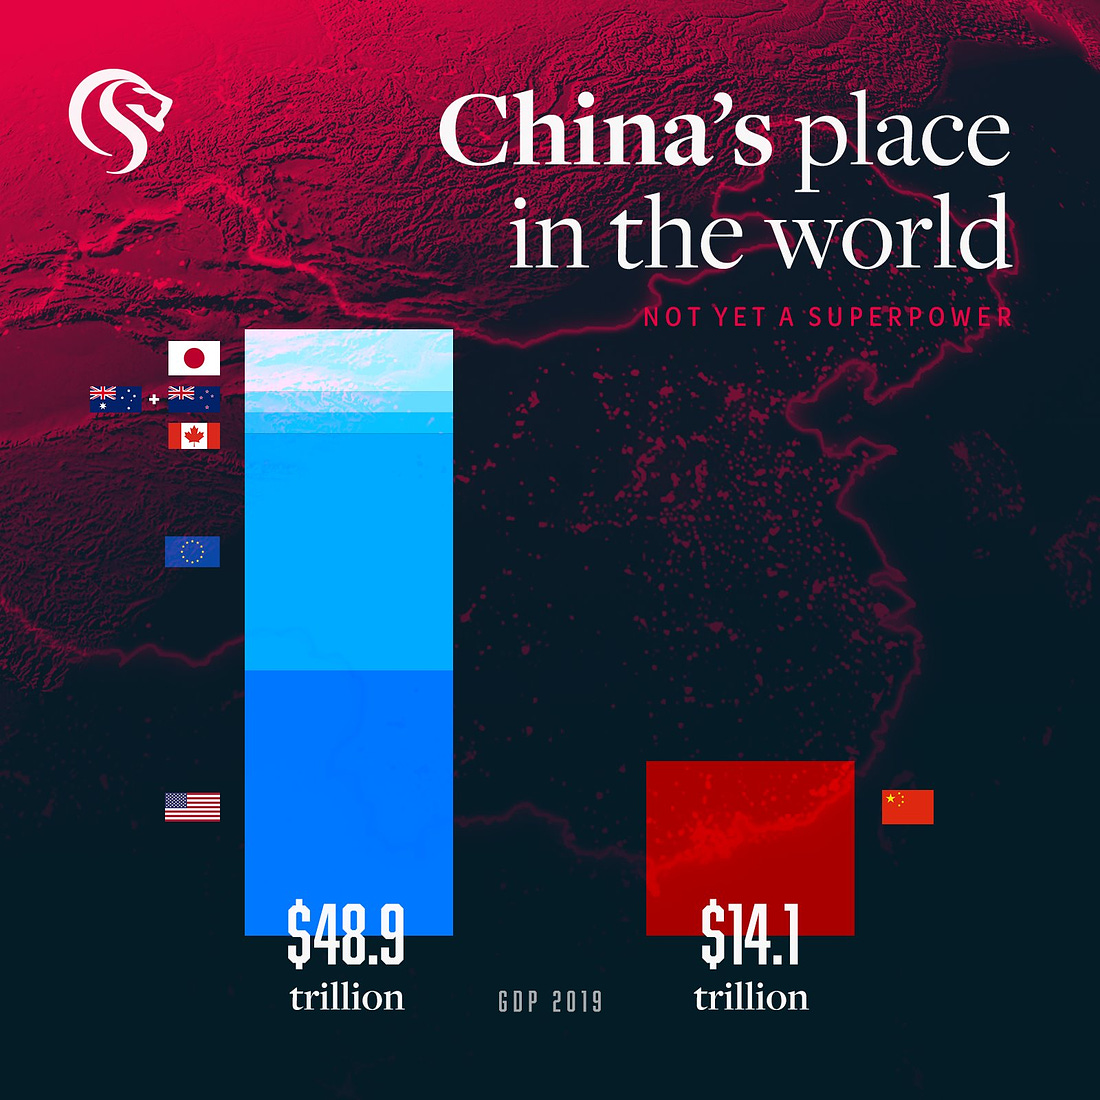 May be an image of text that says 'S China's place in the world NOT YET A SUPERPOWER 0 $48 q 040.0 trillion GDP 2019 $14.1 trillion'